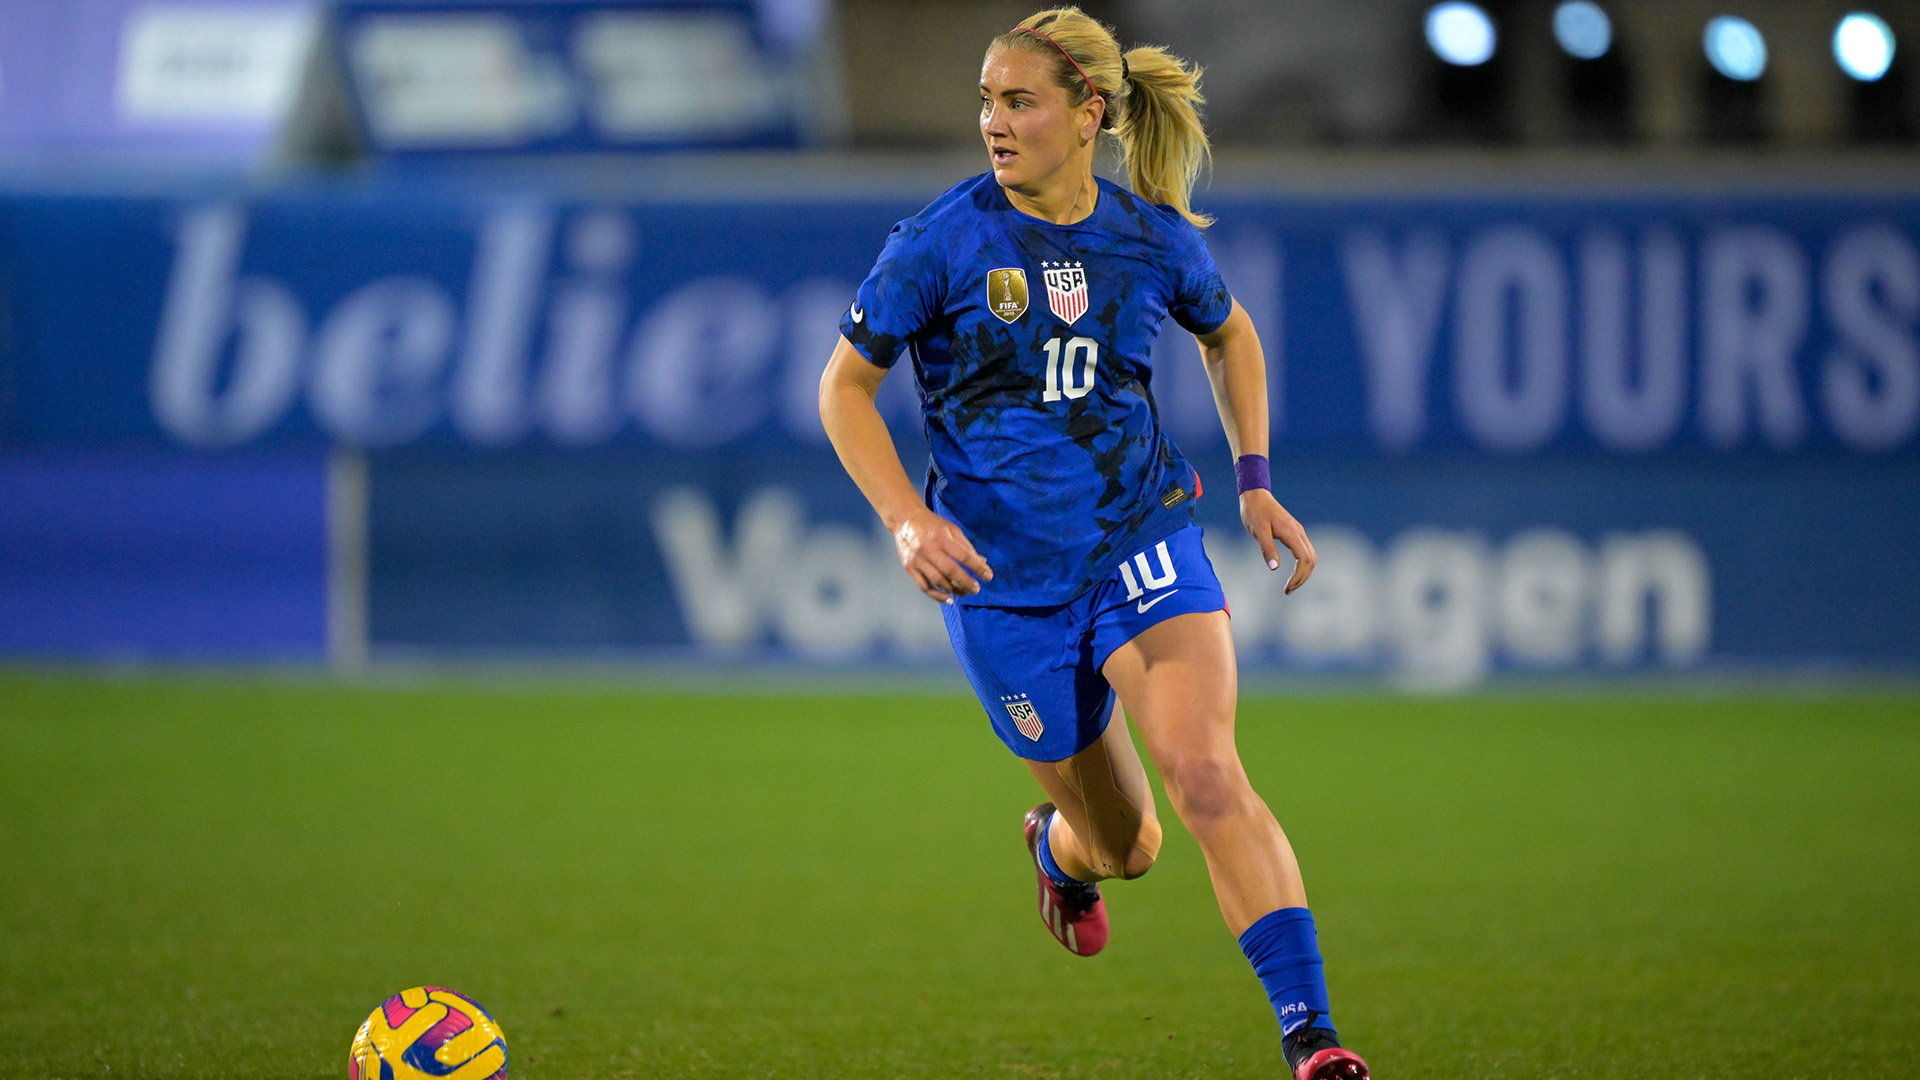 Lindsey Horan #10 of the United States dribbles the ball during a game between Brazil and USWNT at Toyota Stadium on February 22, 2023 in Frisco, Texas.